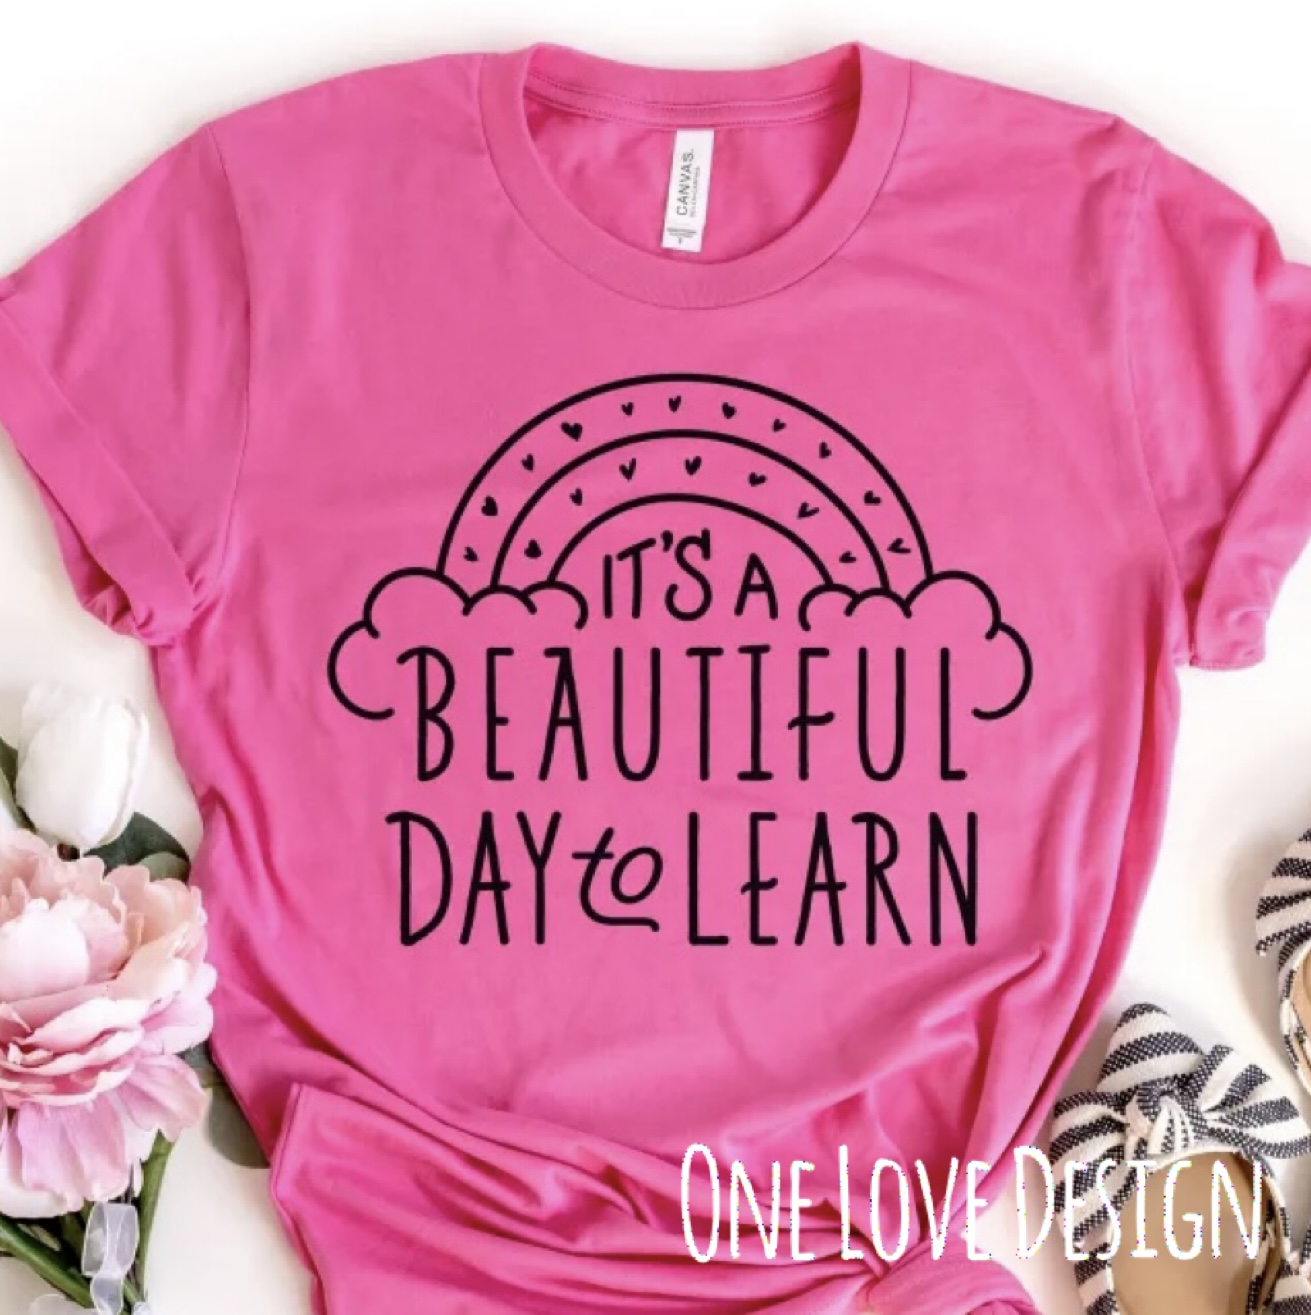 A beautiful day to learn vinyl tee